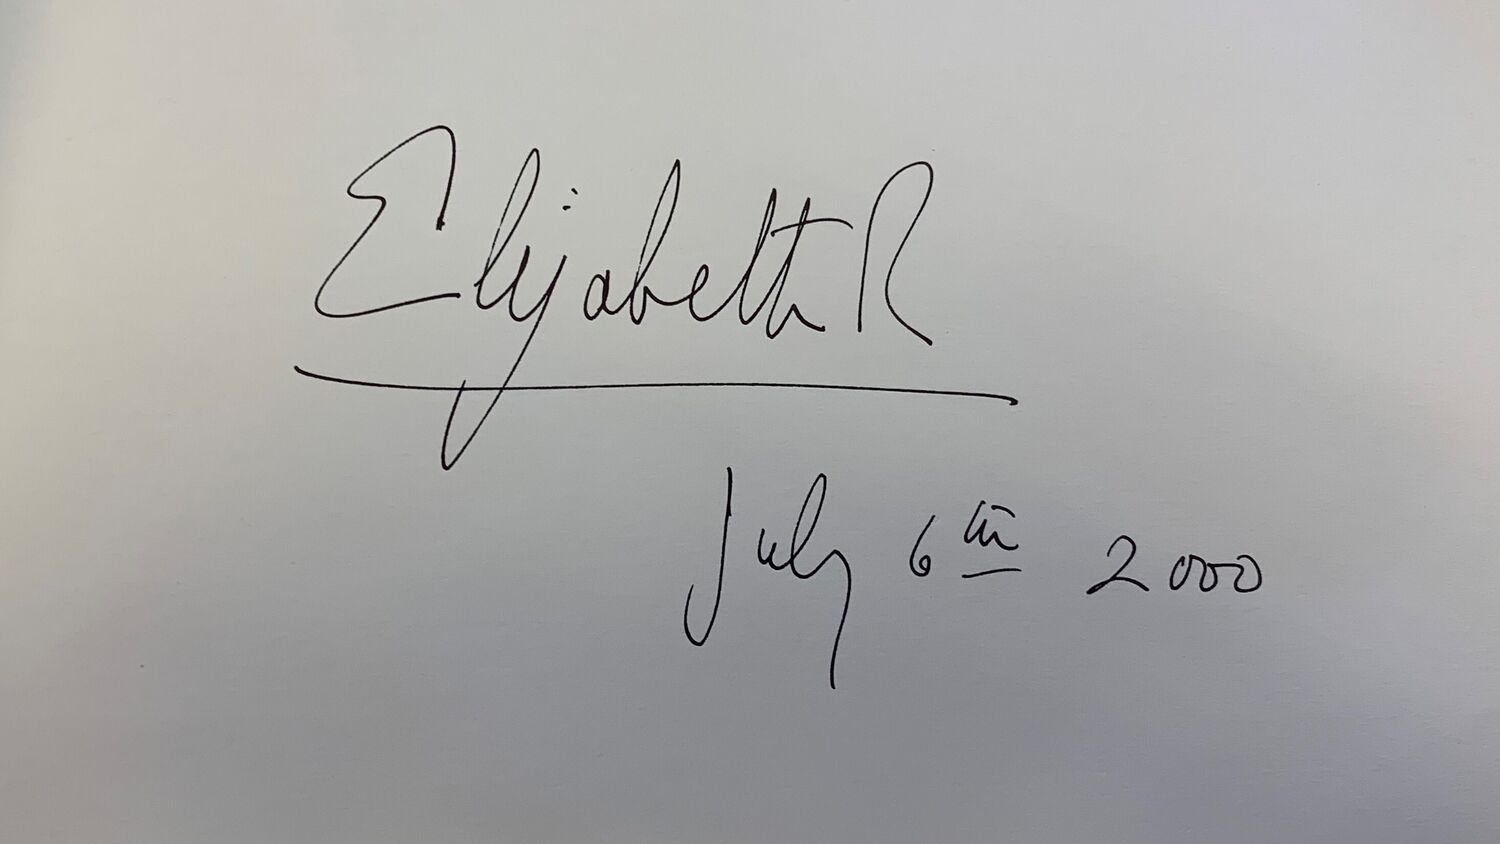 A document with the Queen's signature, dated July 6th 2000